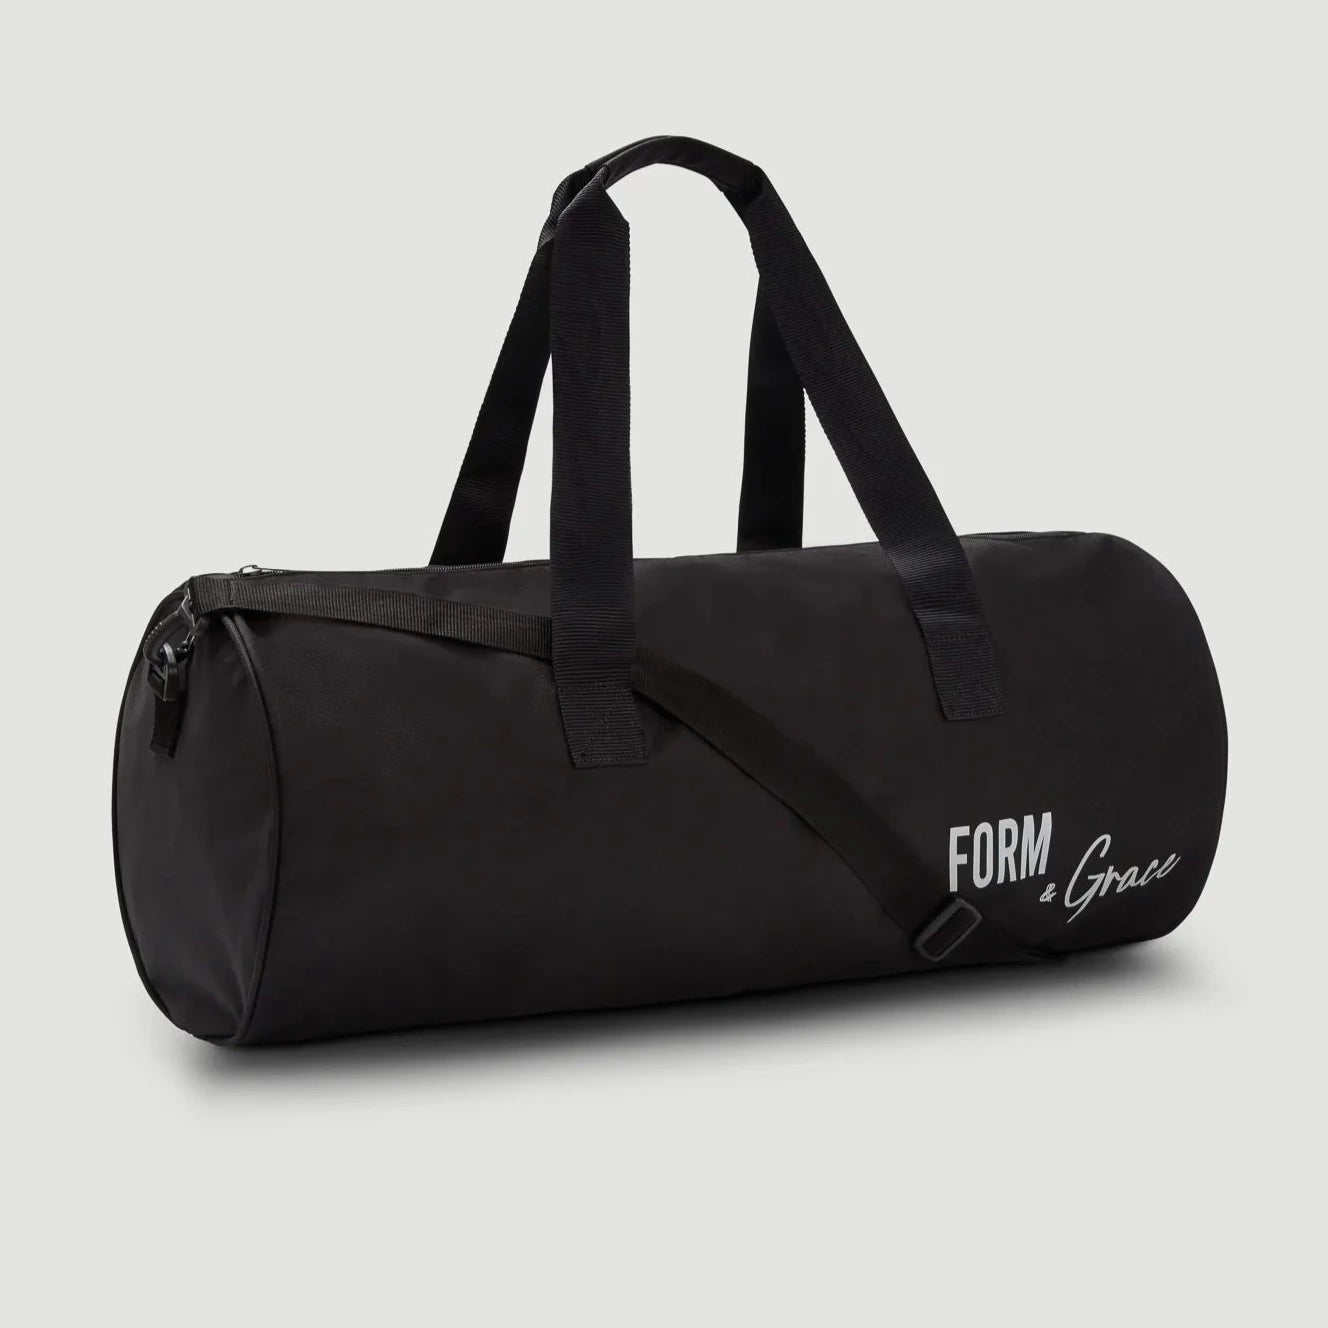 Form & Grace Duffle Gym Bag - Bags & Accessories - British D'sire